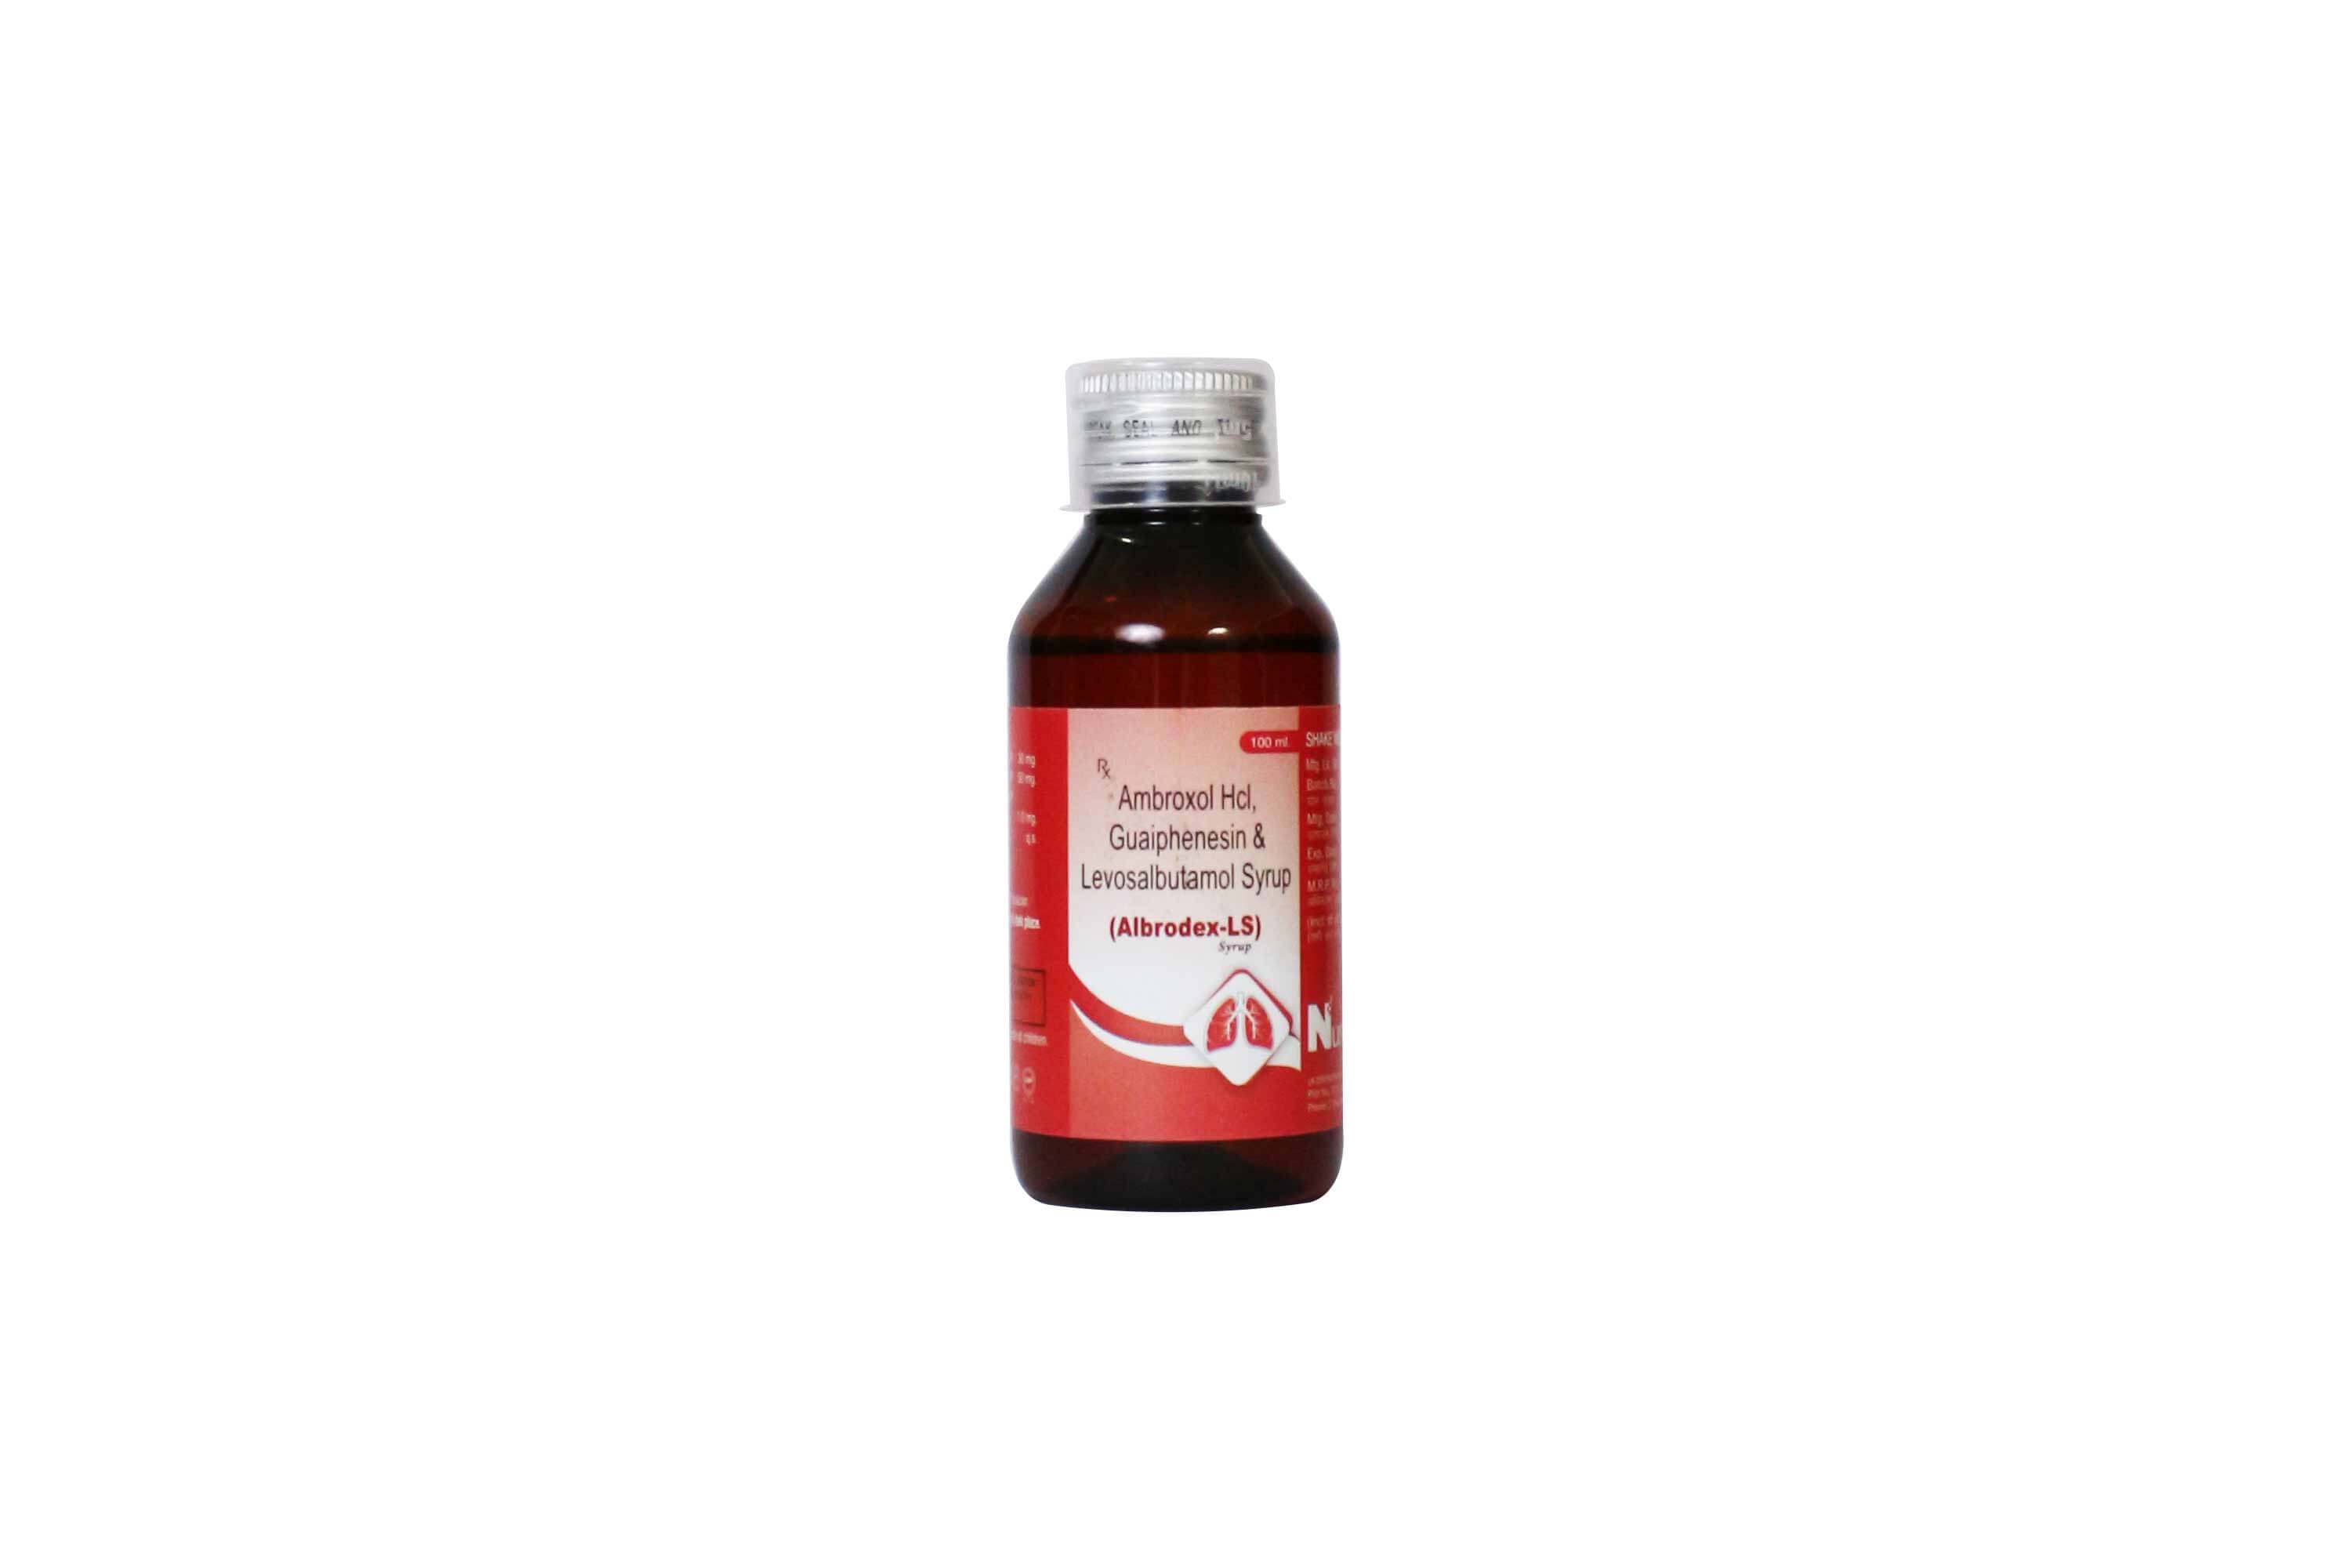 Product Name: Albrodex LS, Compositions of Albrodex LS are Ambrol HCL, Guaiphenesin & Levosabutamol  Syrup - Numantis Healthcare